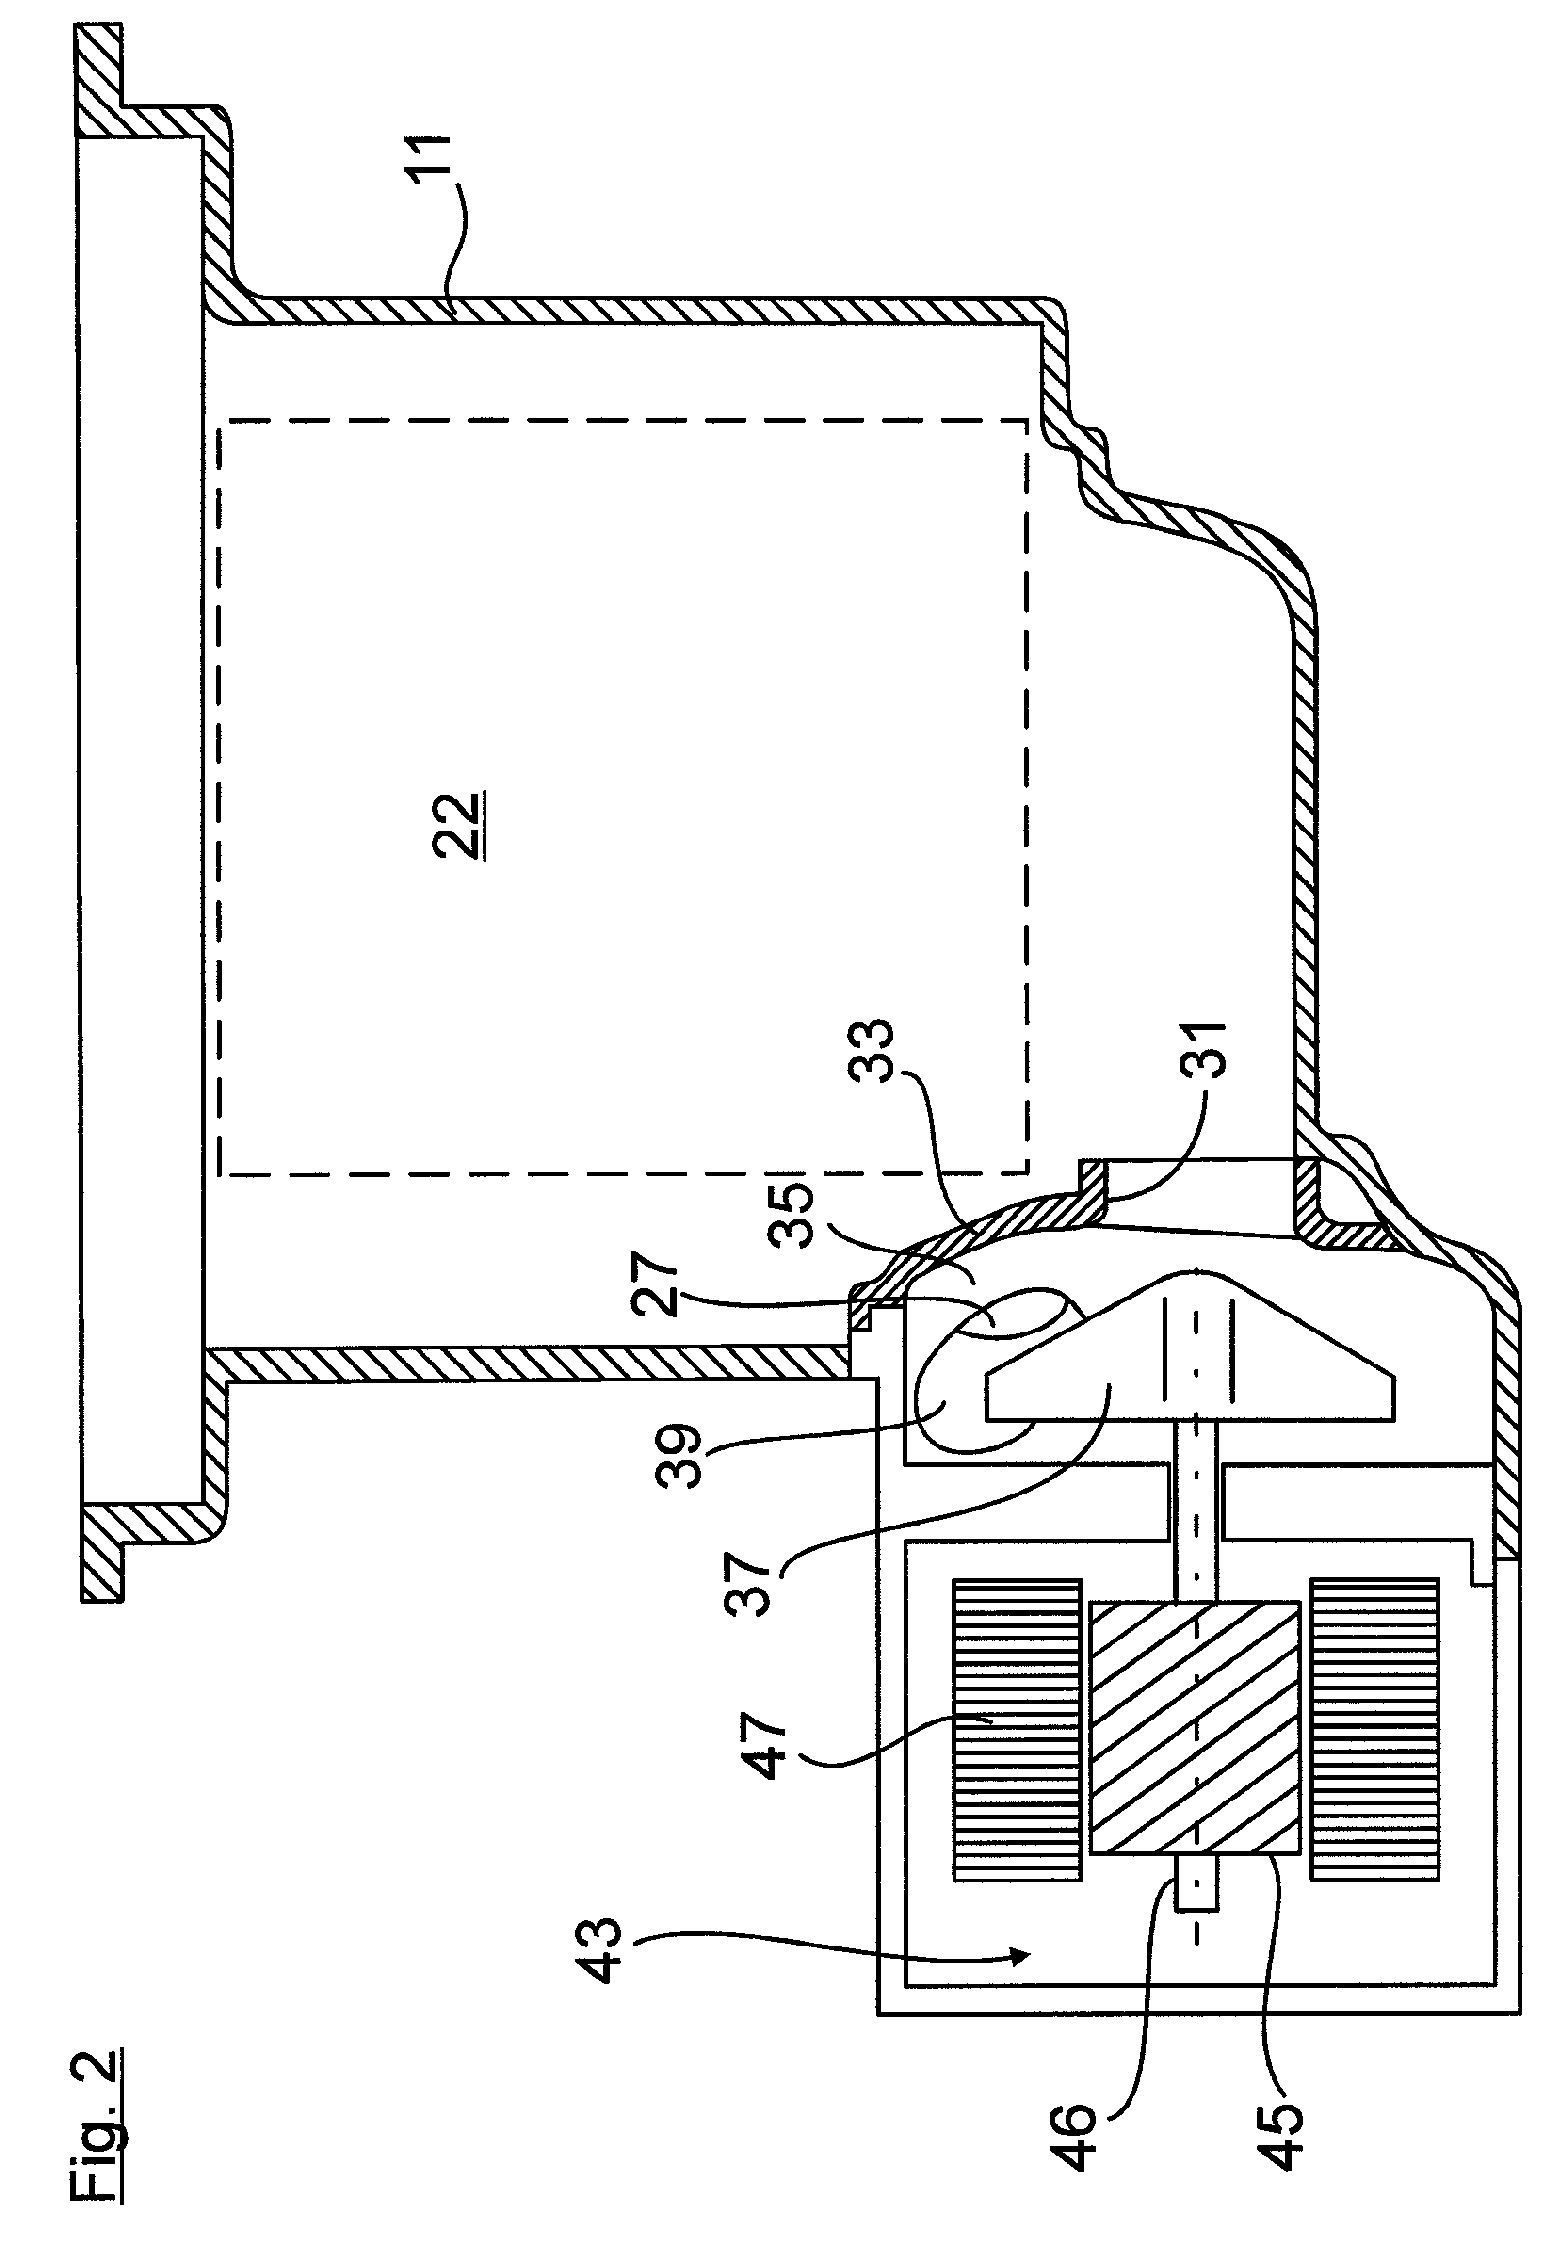 Water-conducting household appliance, particularly a dishwasher